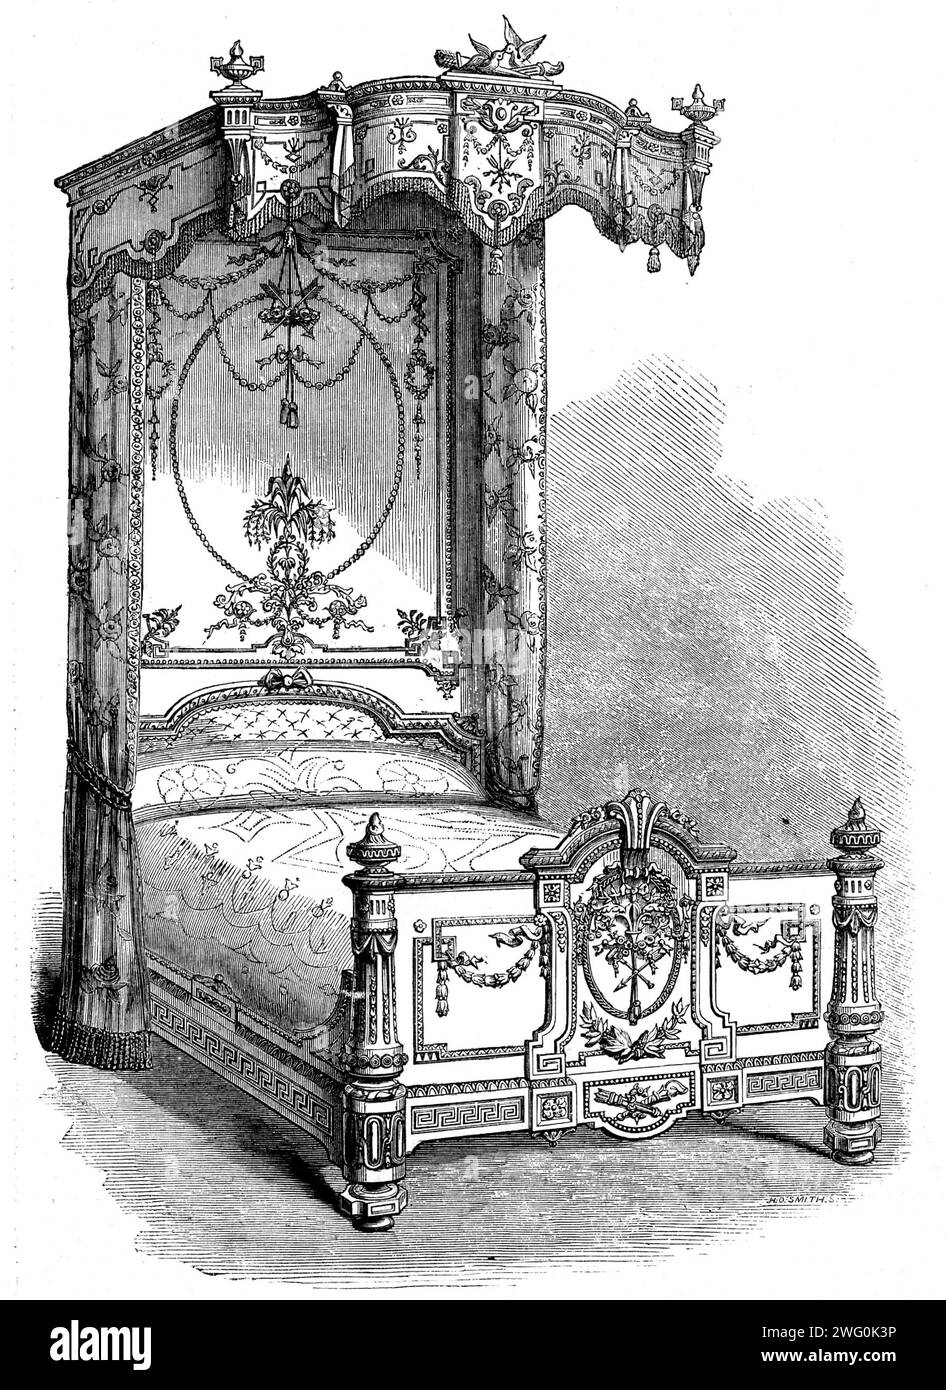 The International Exhibition: bedstead in the Furniture Court by Heal and Son, Tottenham-Court-road, 1862. 'On the centre of the canopy rest two cooing doves enjoying each other's caresses, a quiver of love darts ready to he hurled forth...Beneath this, on the damask hanging, is a pair of arrows braided together, pendent from festoons of flowers, and these darts are again repeated on the damask at the head of the bed, where they are encompassed by a wreath of roses, and lower upon the same surface there is a bow of ribbon securely notted [sic] and binding two tassels together...at the foot of Stock Photo